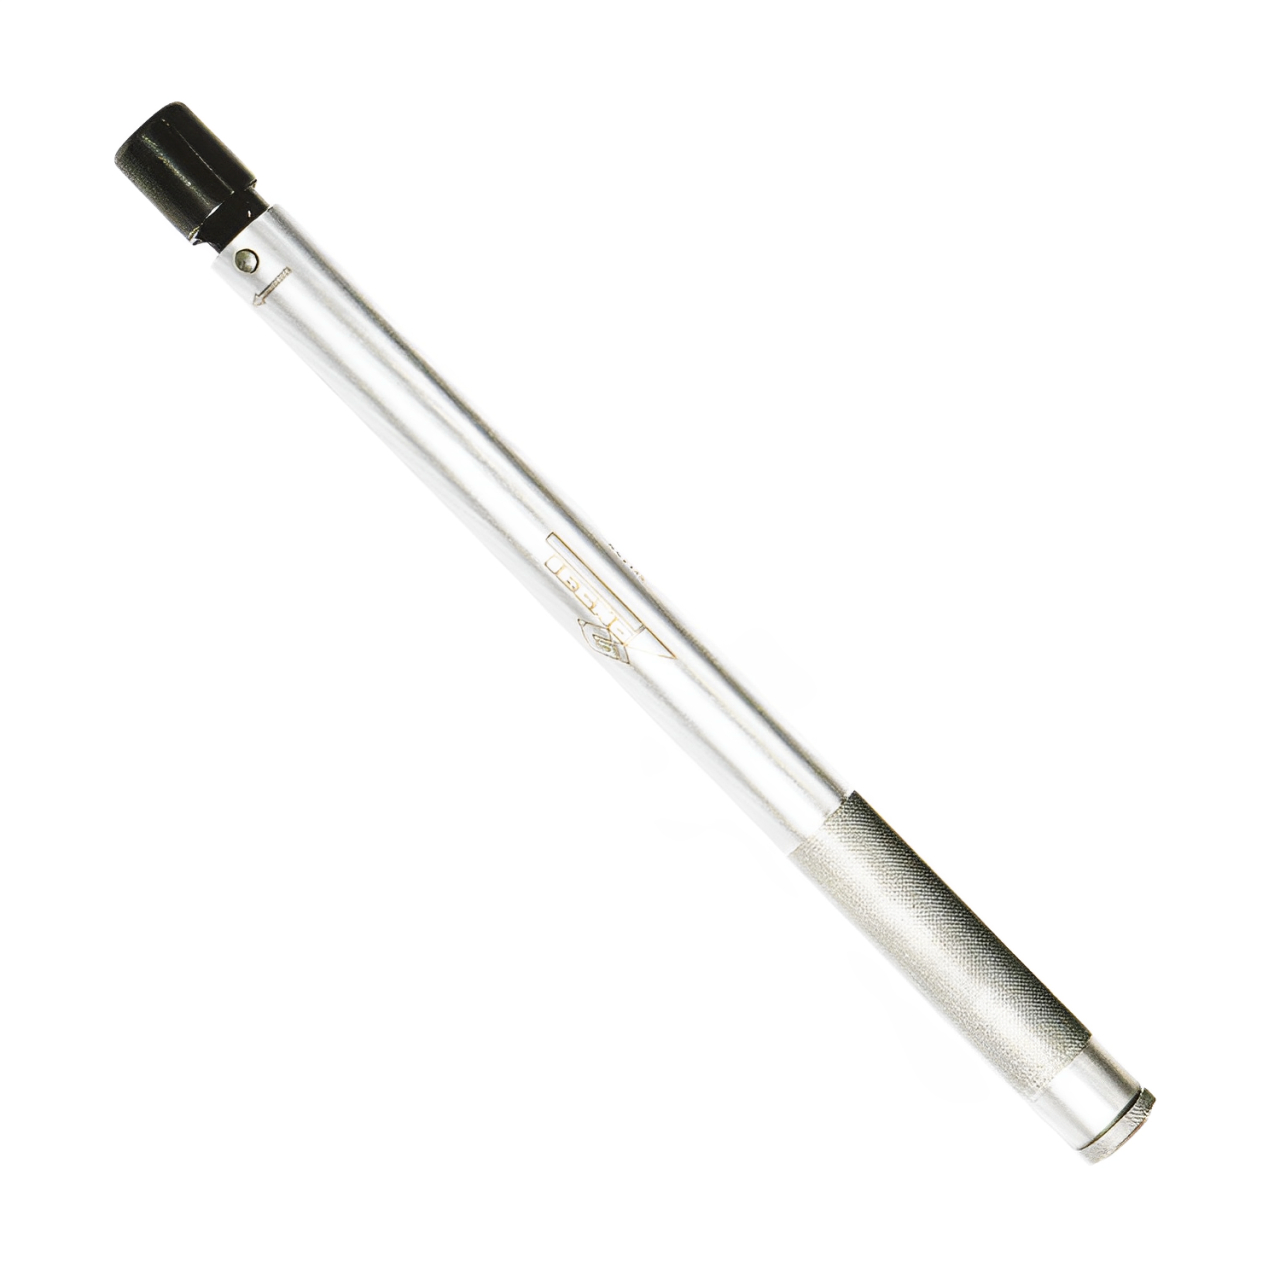 TECNOGI 603T Torque Wrench For Production Lines 20 - 120 Nm - Premium Torque Wrench from TECNOGI - Shop now at Yew Aik.